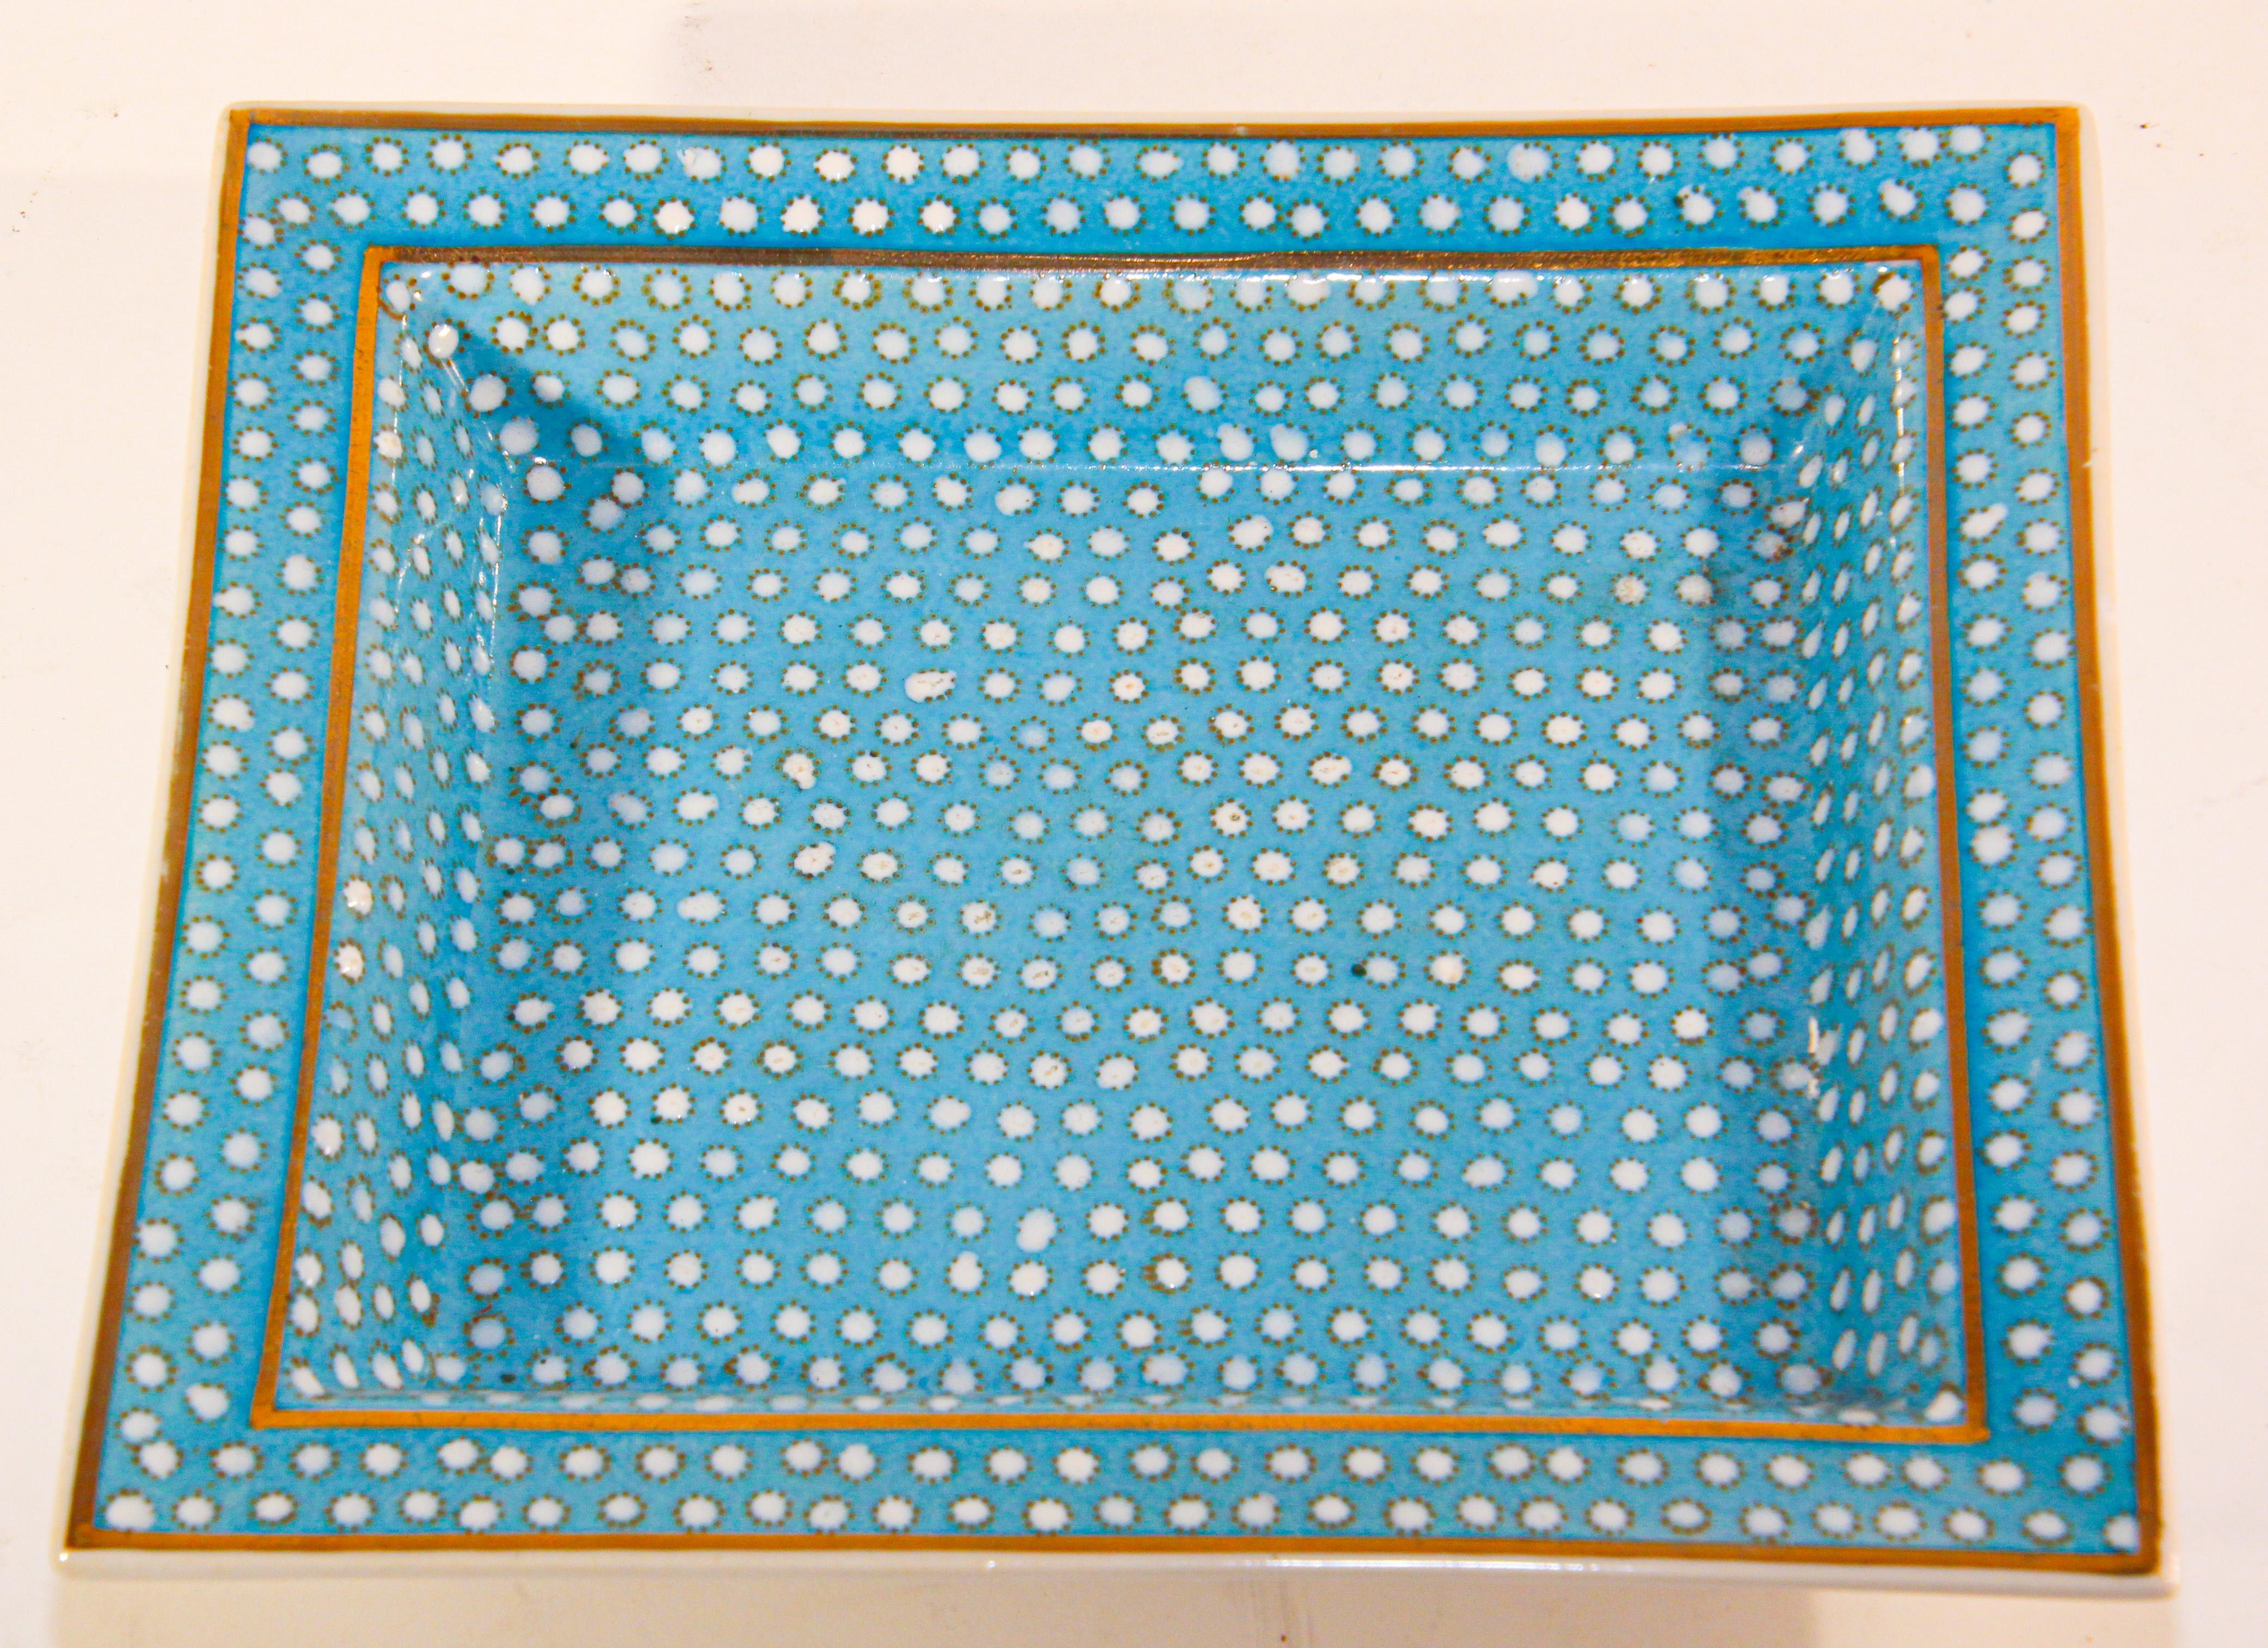 Porcelain small catchall trinket tray with turquoise and white dots and gold rim.
This lovely vide poche, porcelain trinket dish, change tray features white fine bone china decorated with a turquoise and gold border and white